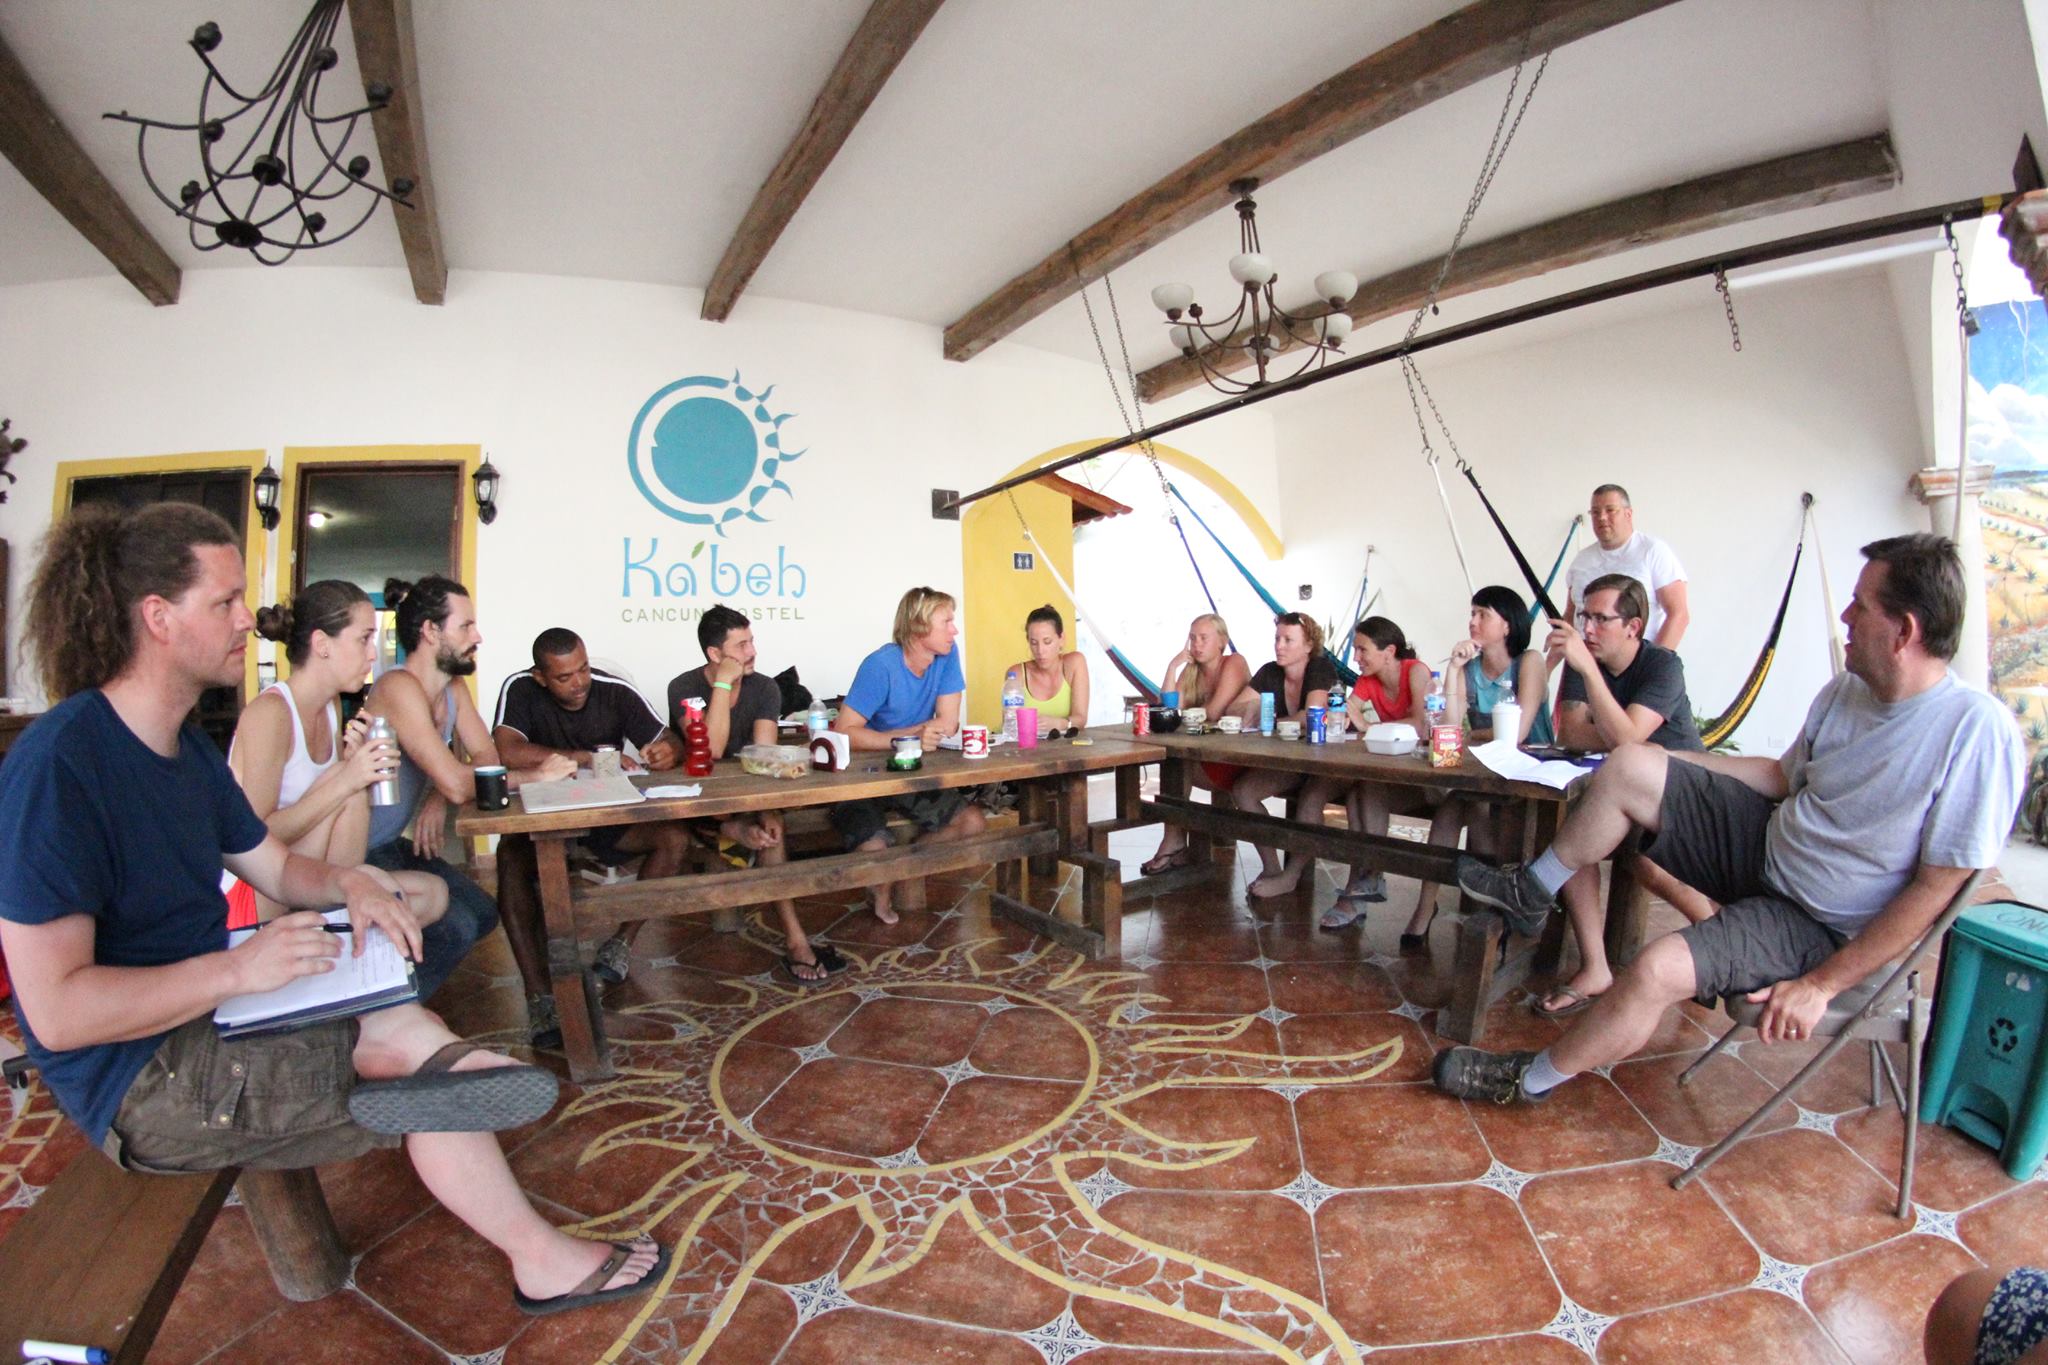 people sitting at a table in cancun discussing the hostel industry